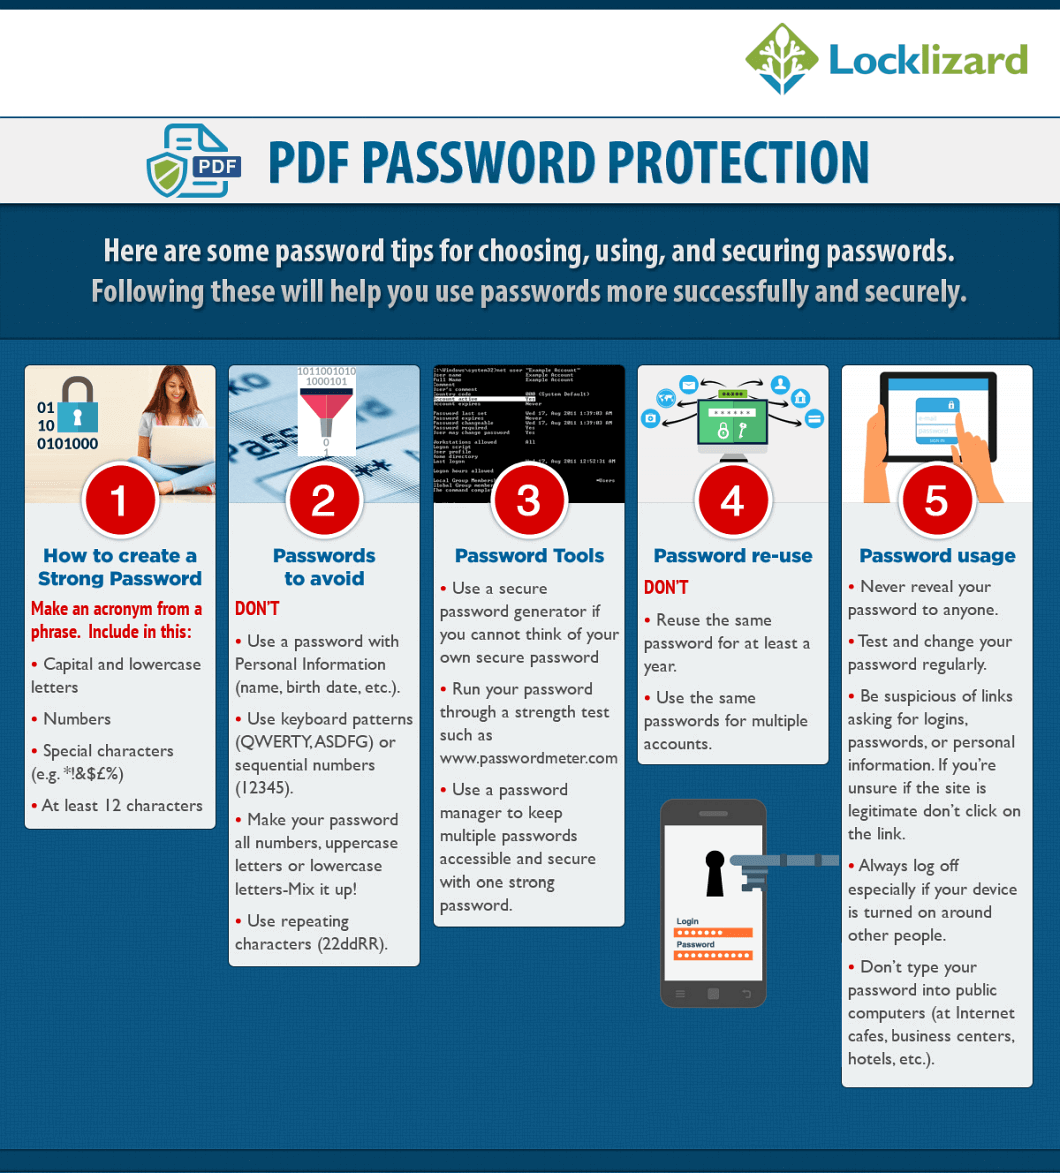 How safe is a password protected PDF?